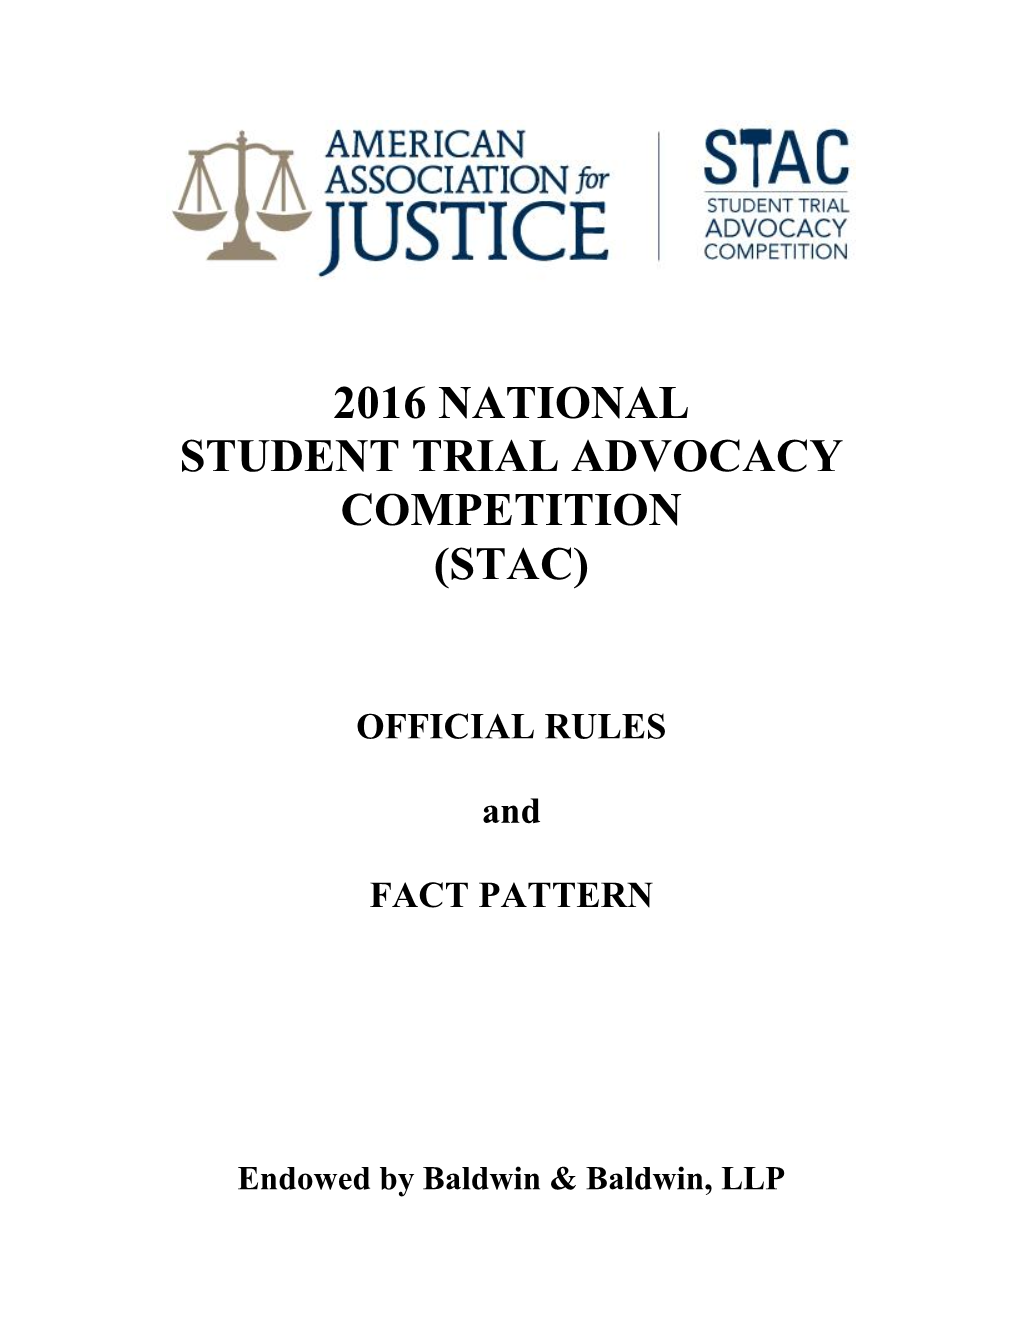 2016 National Student Trial Advocacy Competition (Stac)